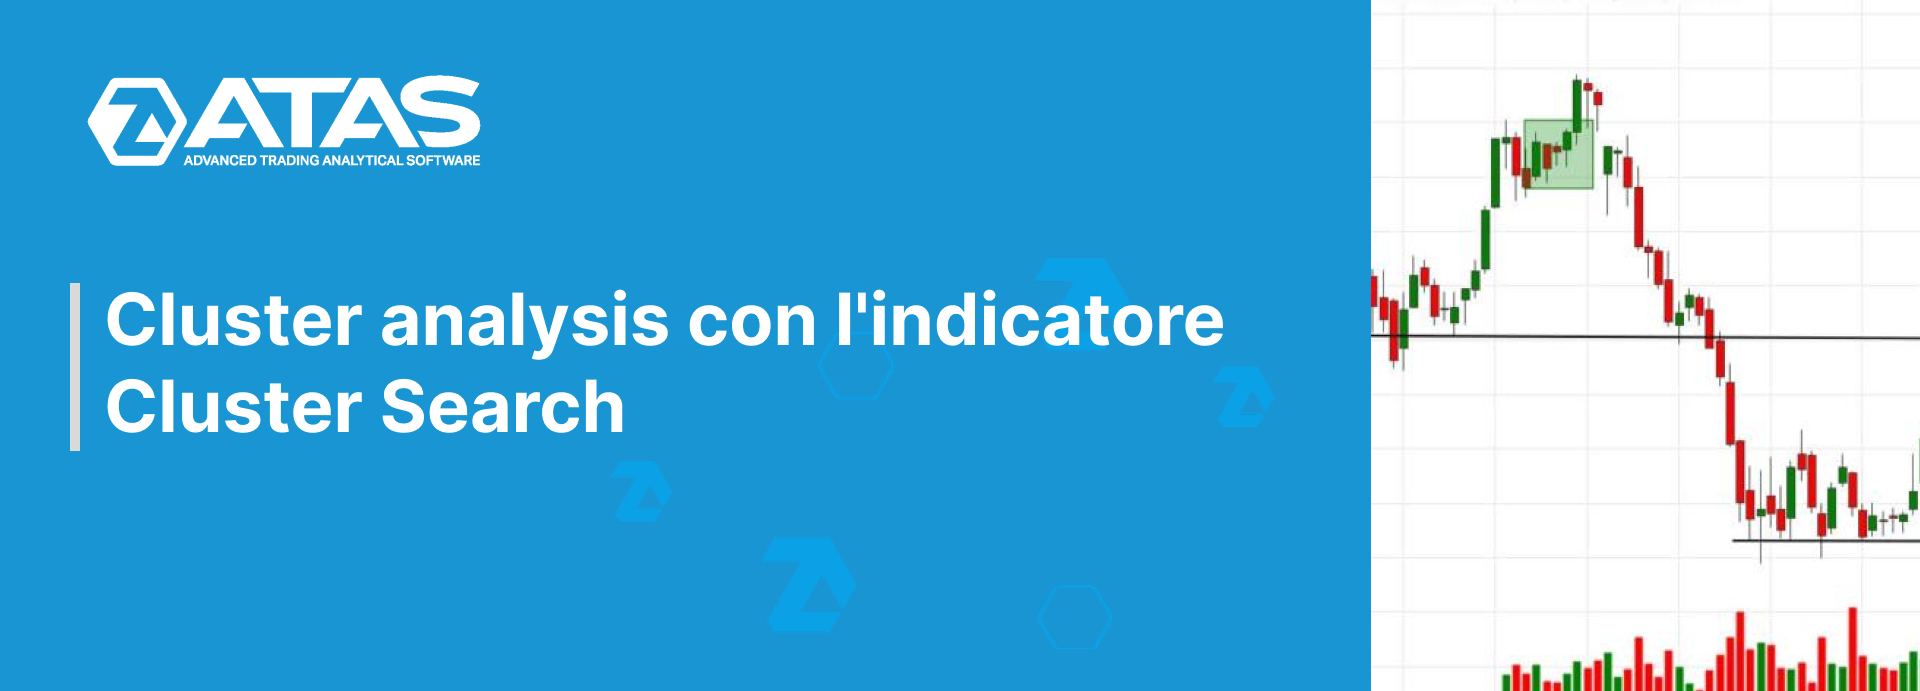 Cluster analysis con l'indicatore Cluster Search